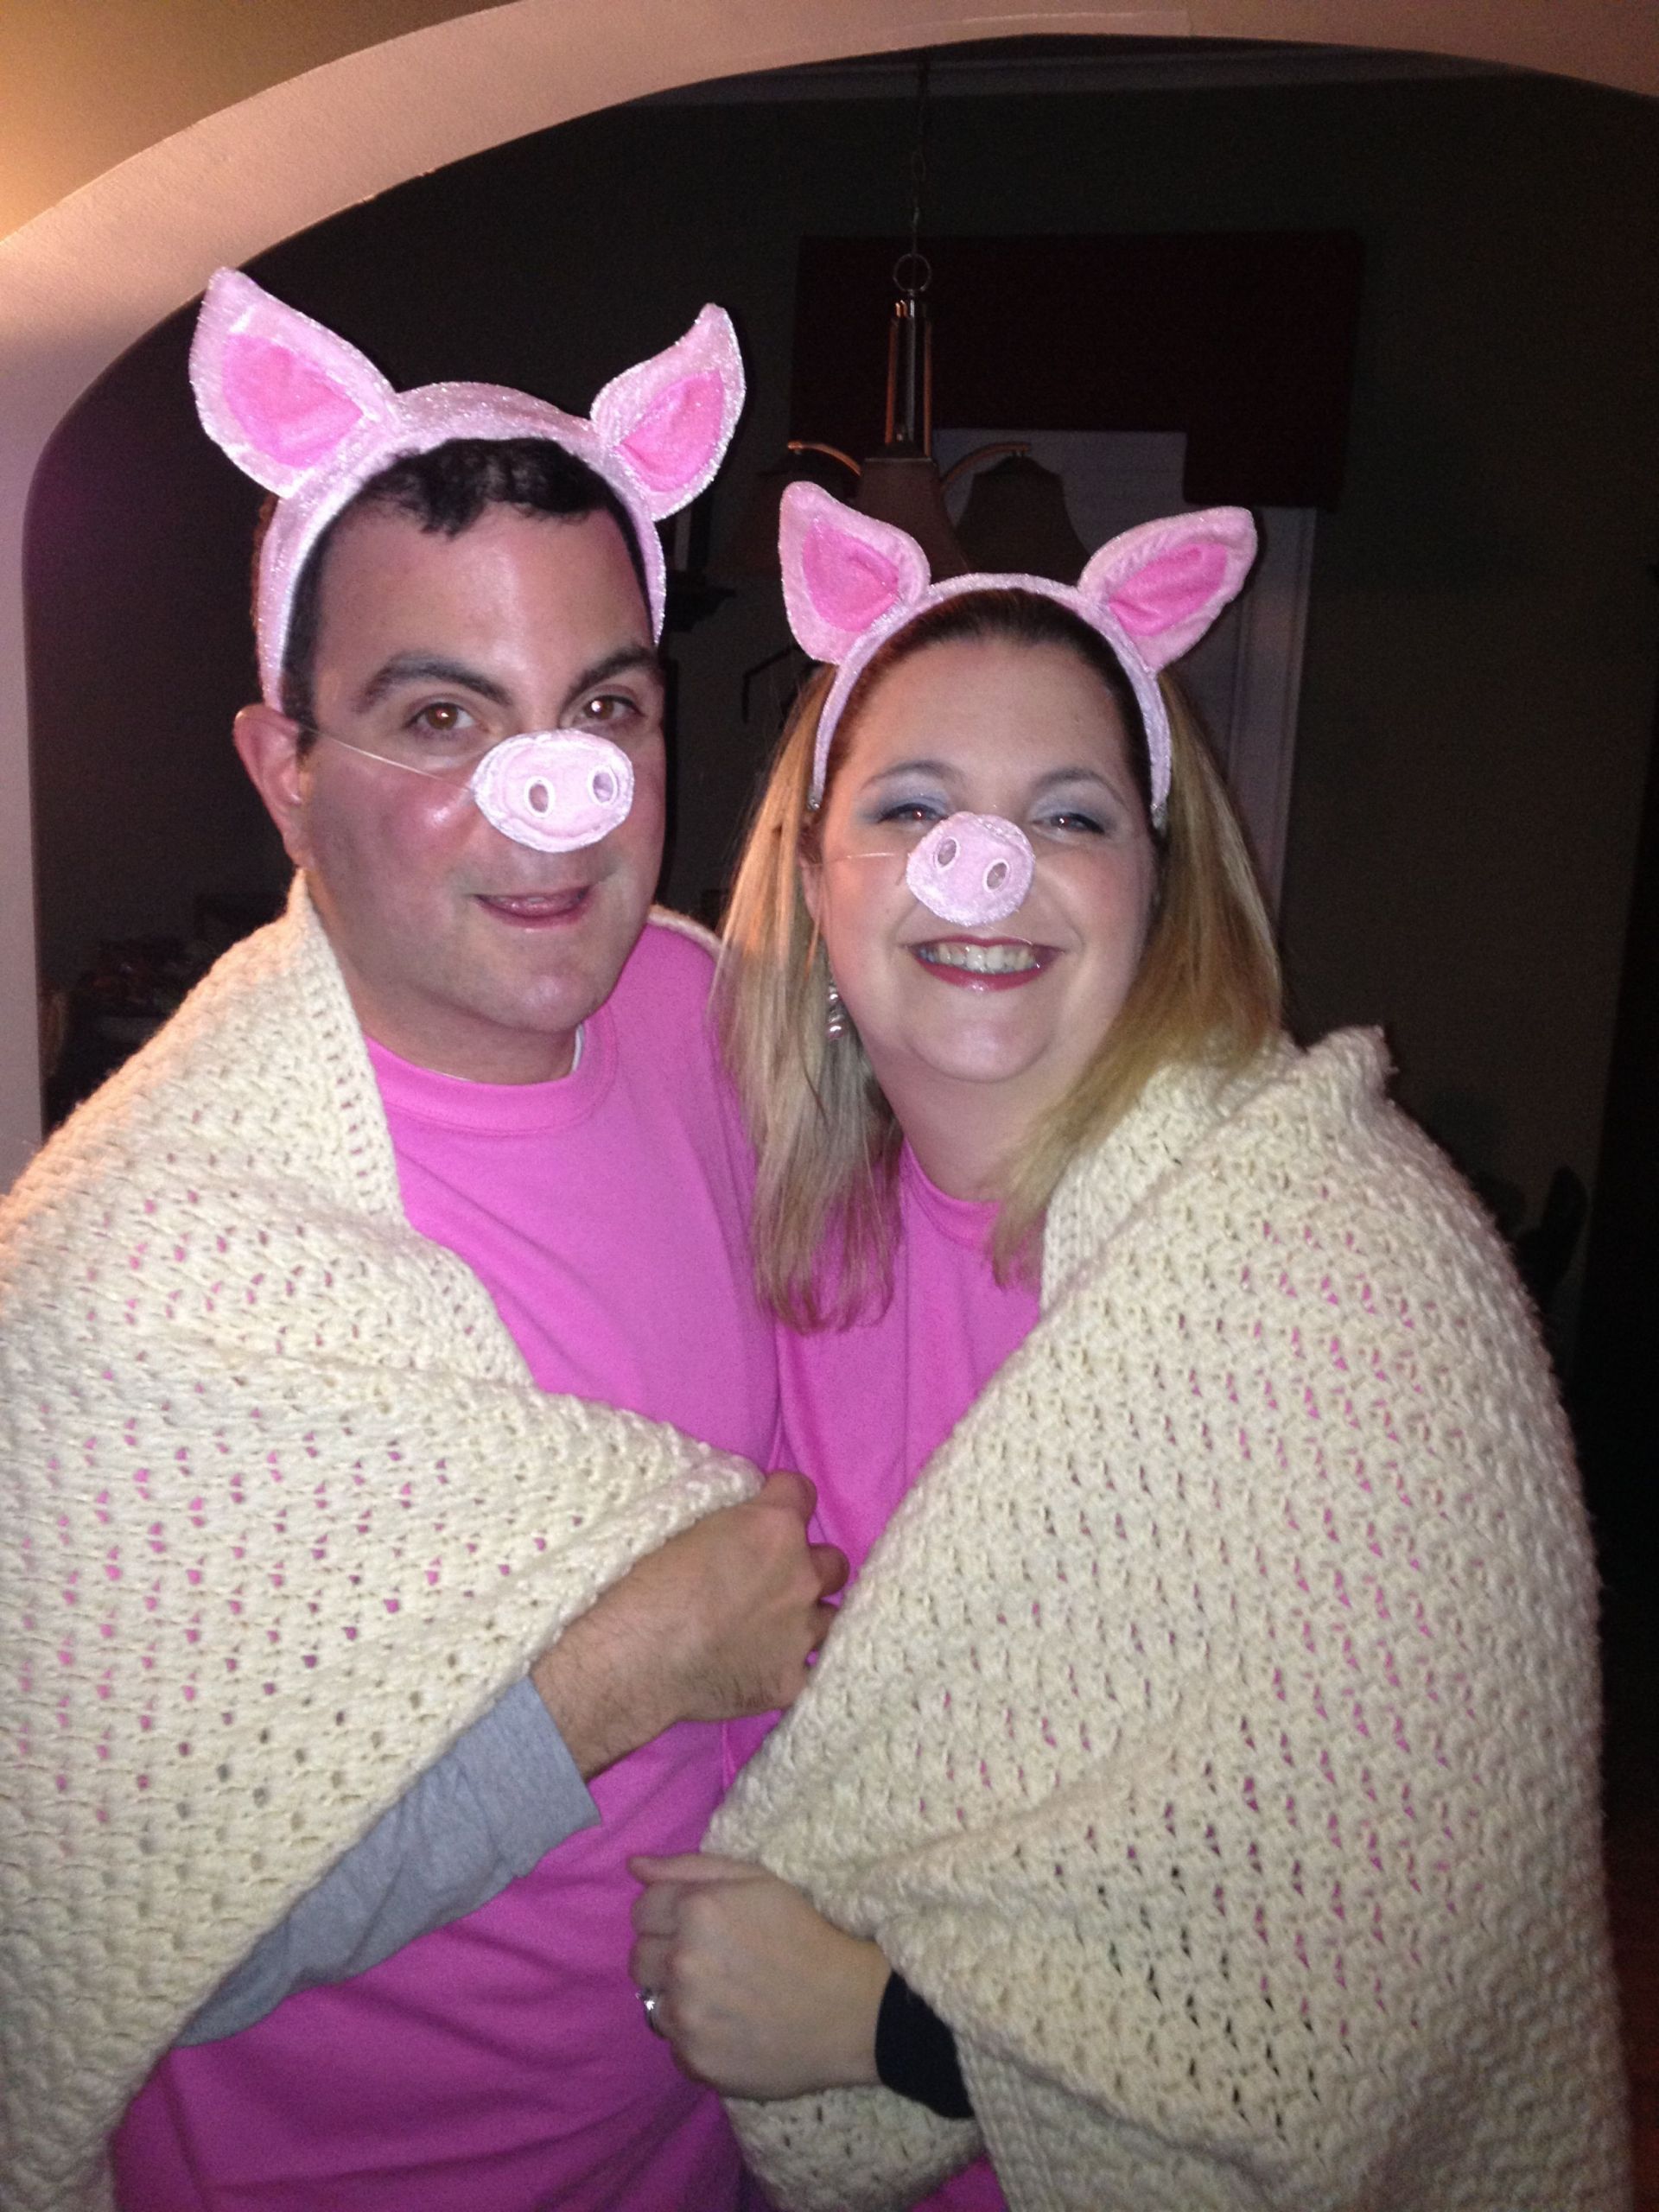 Easy DIY Couple Costumes
 17 DIY Couples Costumes That Will WIN Halloween